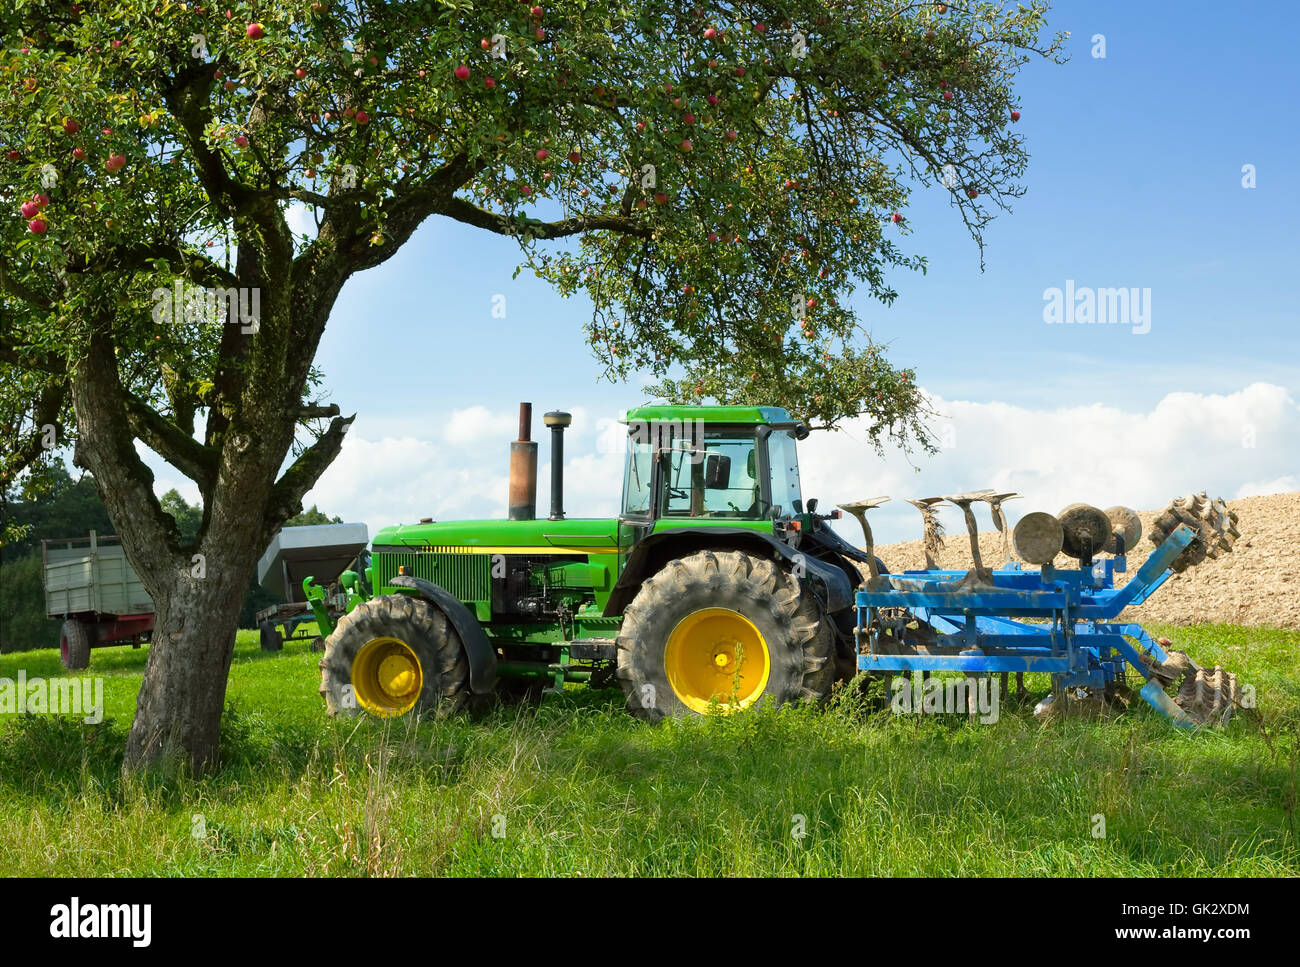 tractor blends in beautiful rural landscape Stock Photo